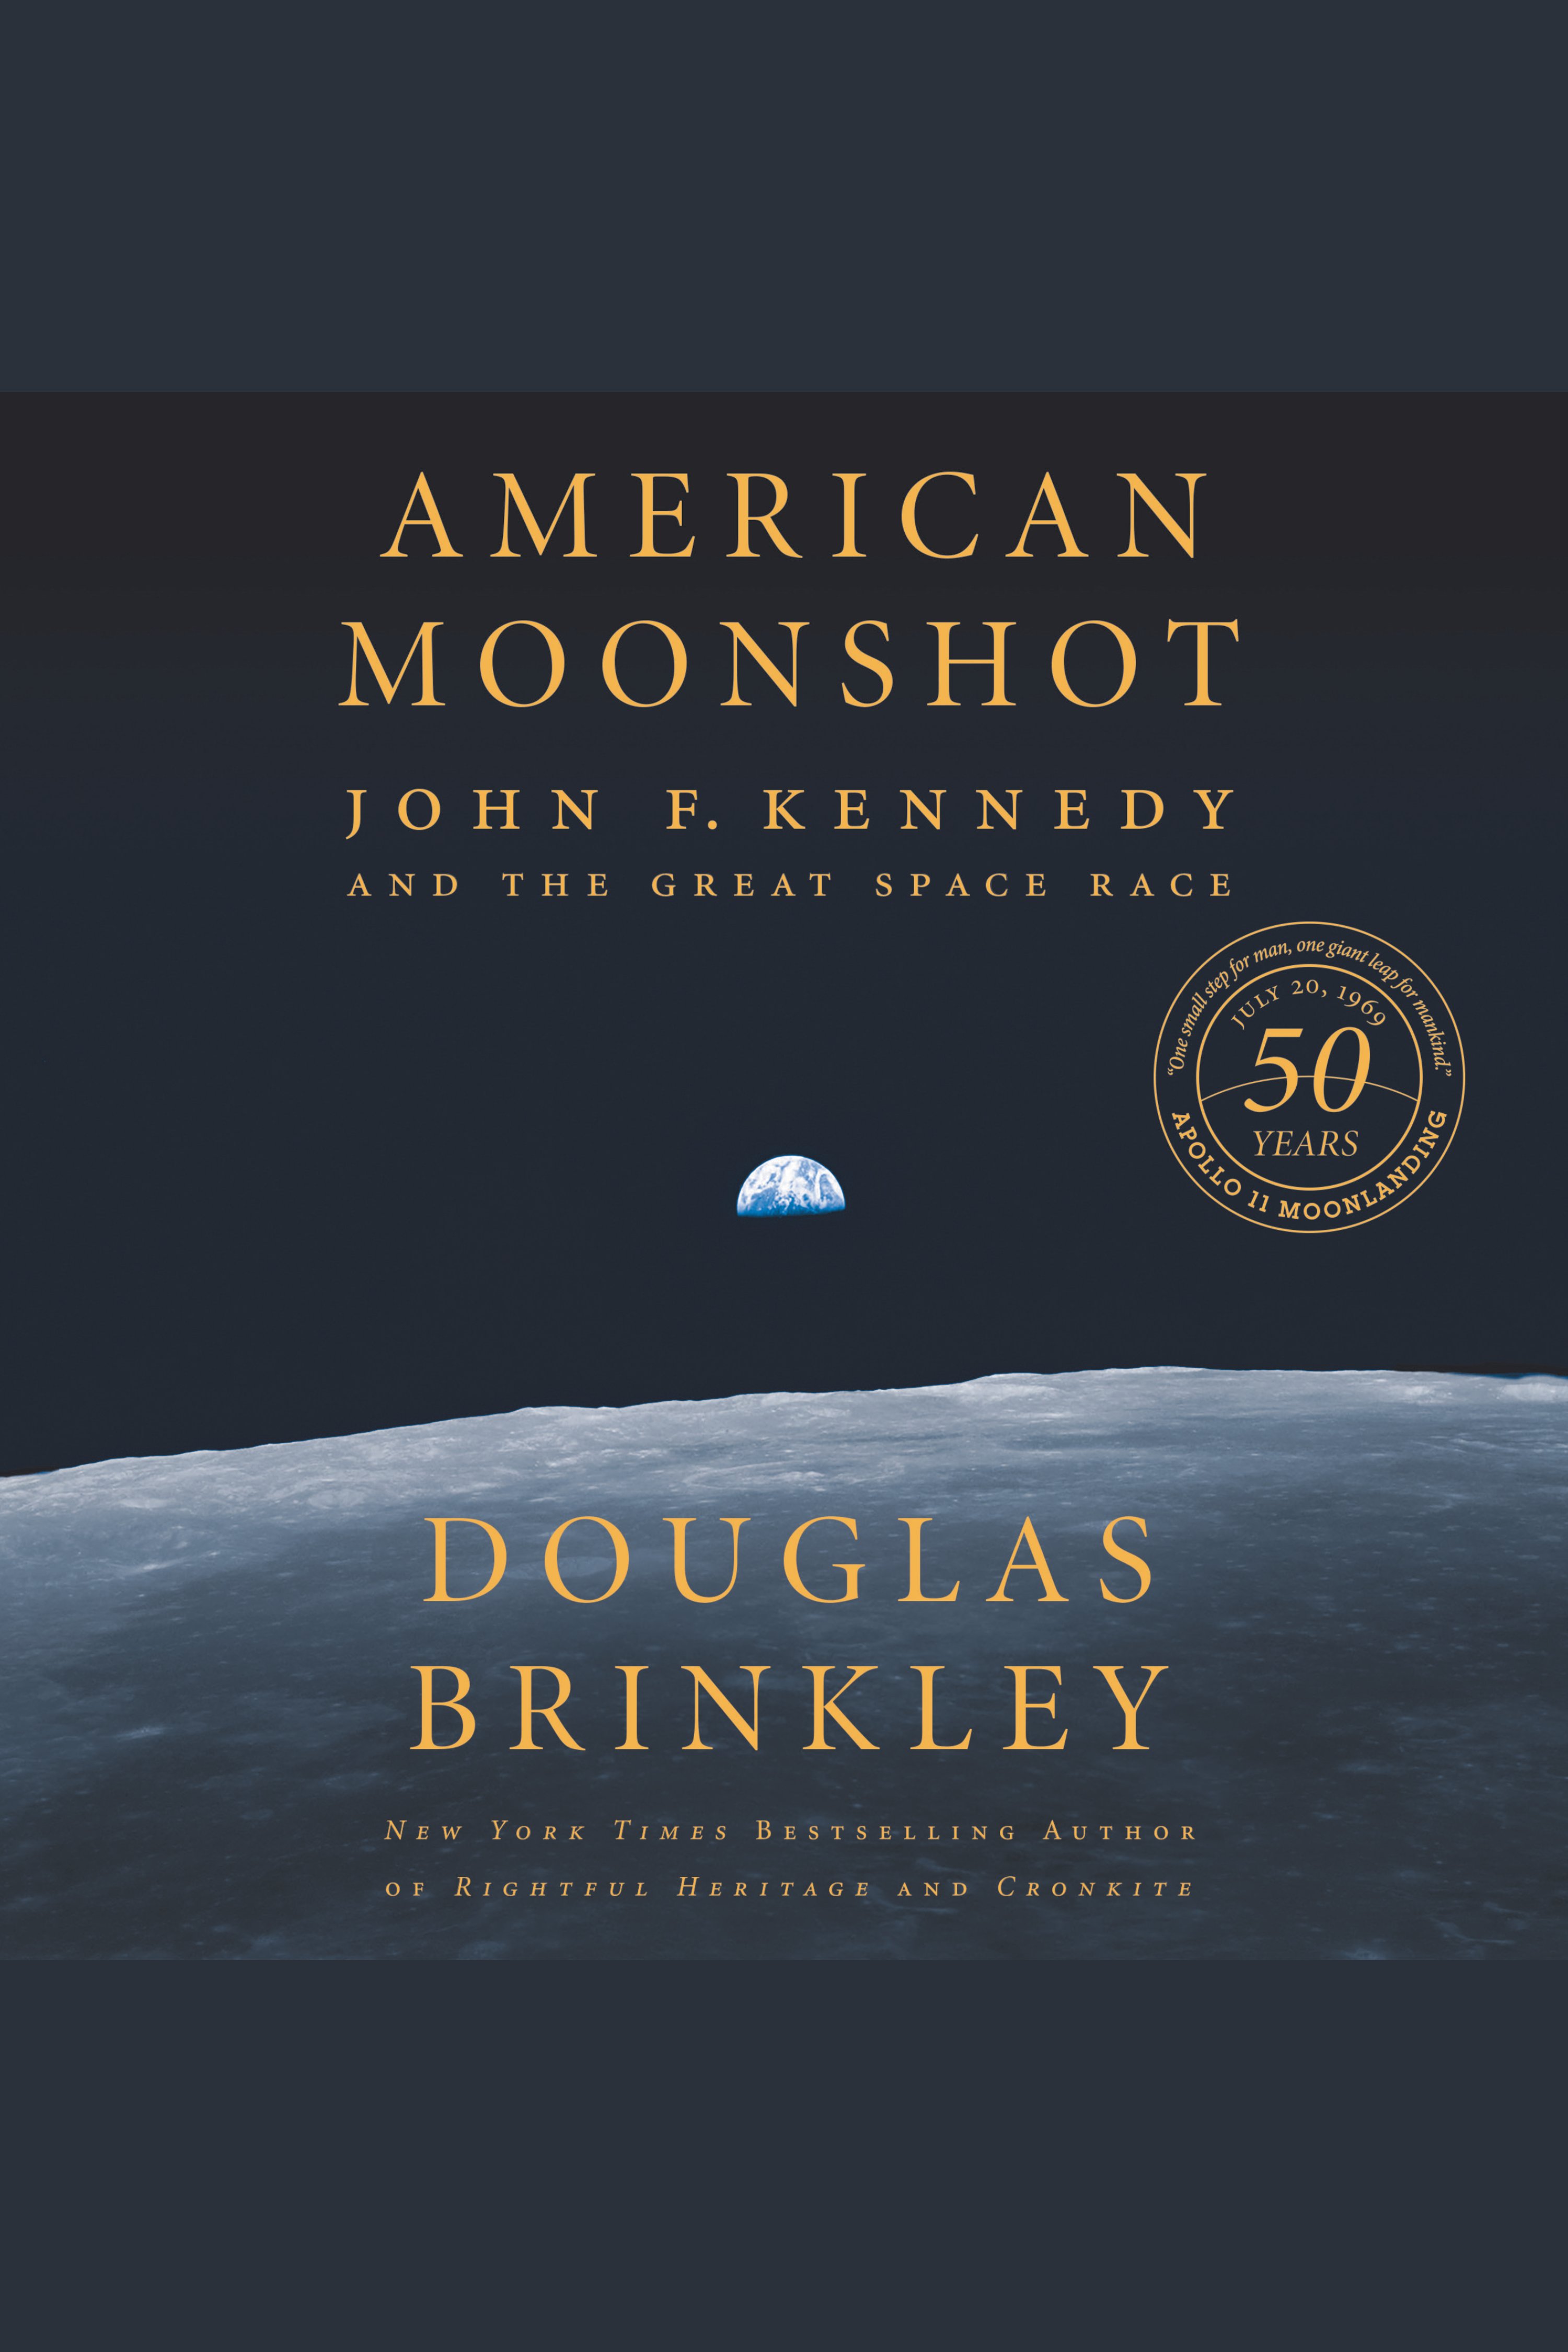 American moonshot John F. Kennedy and the great space race cover image